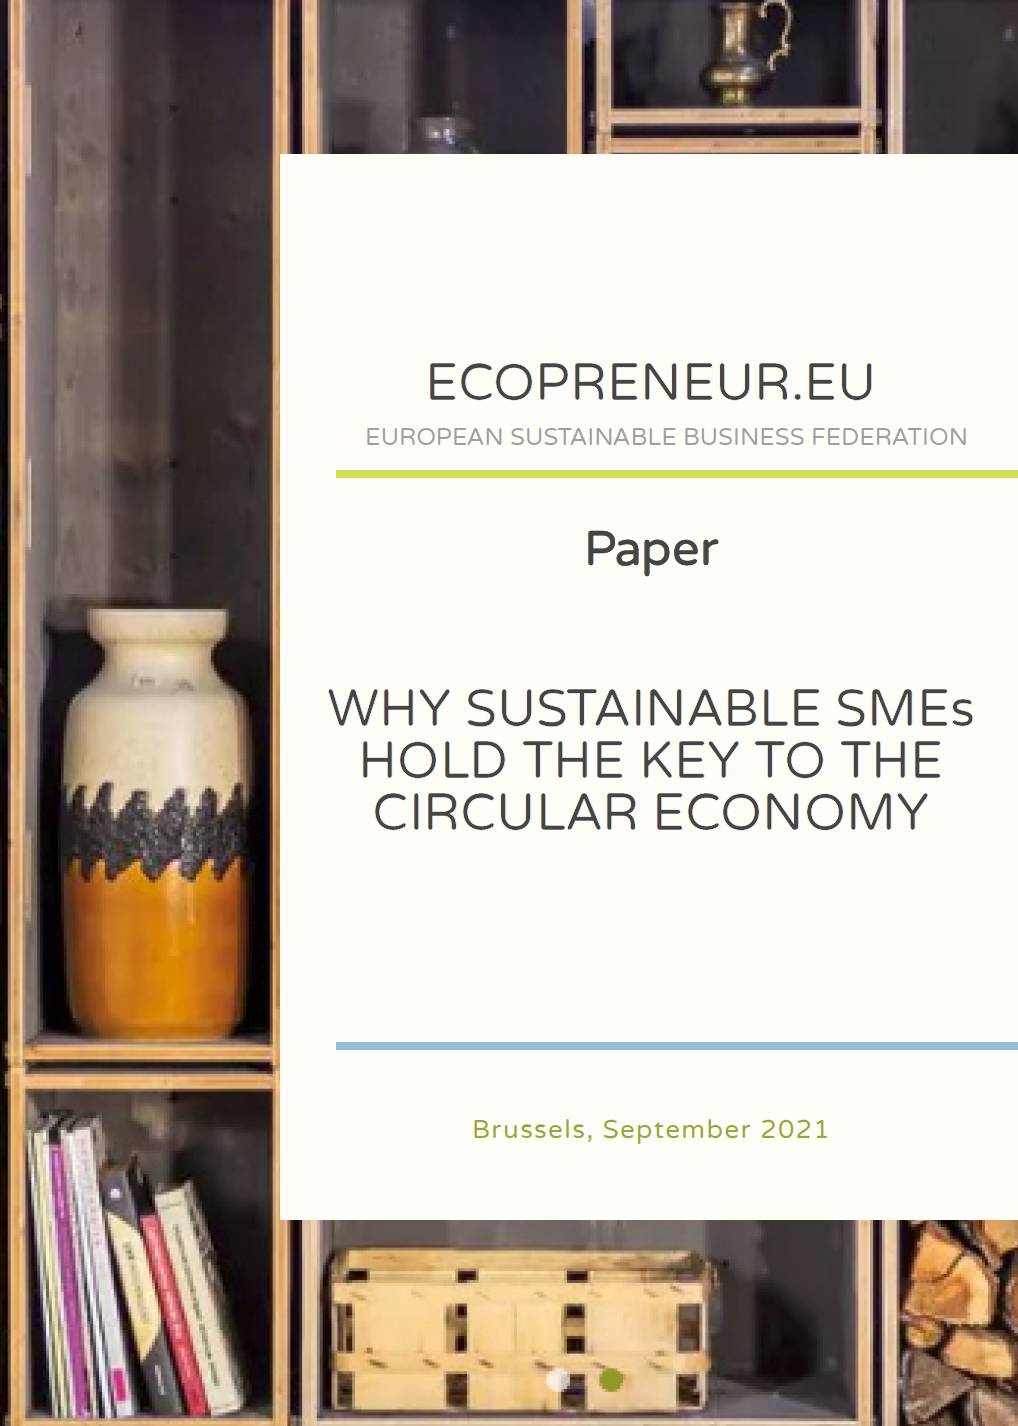 Why Sustainable SMEs Hold the Key to the Circular Economy